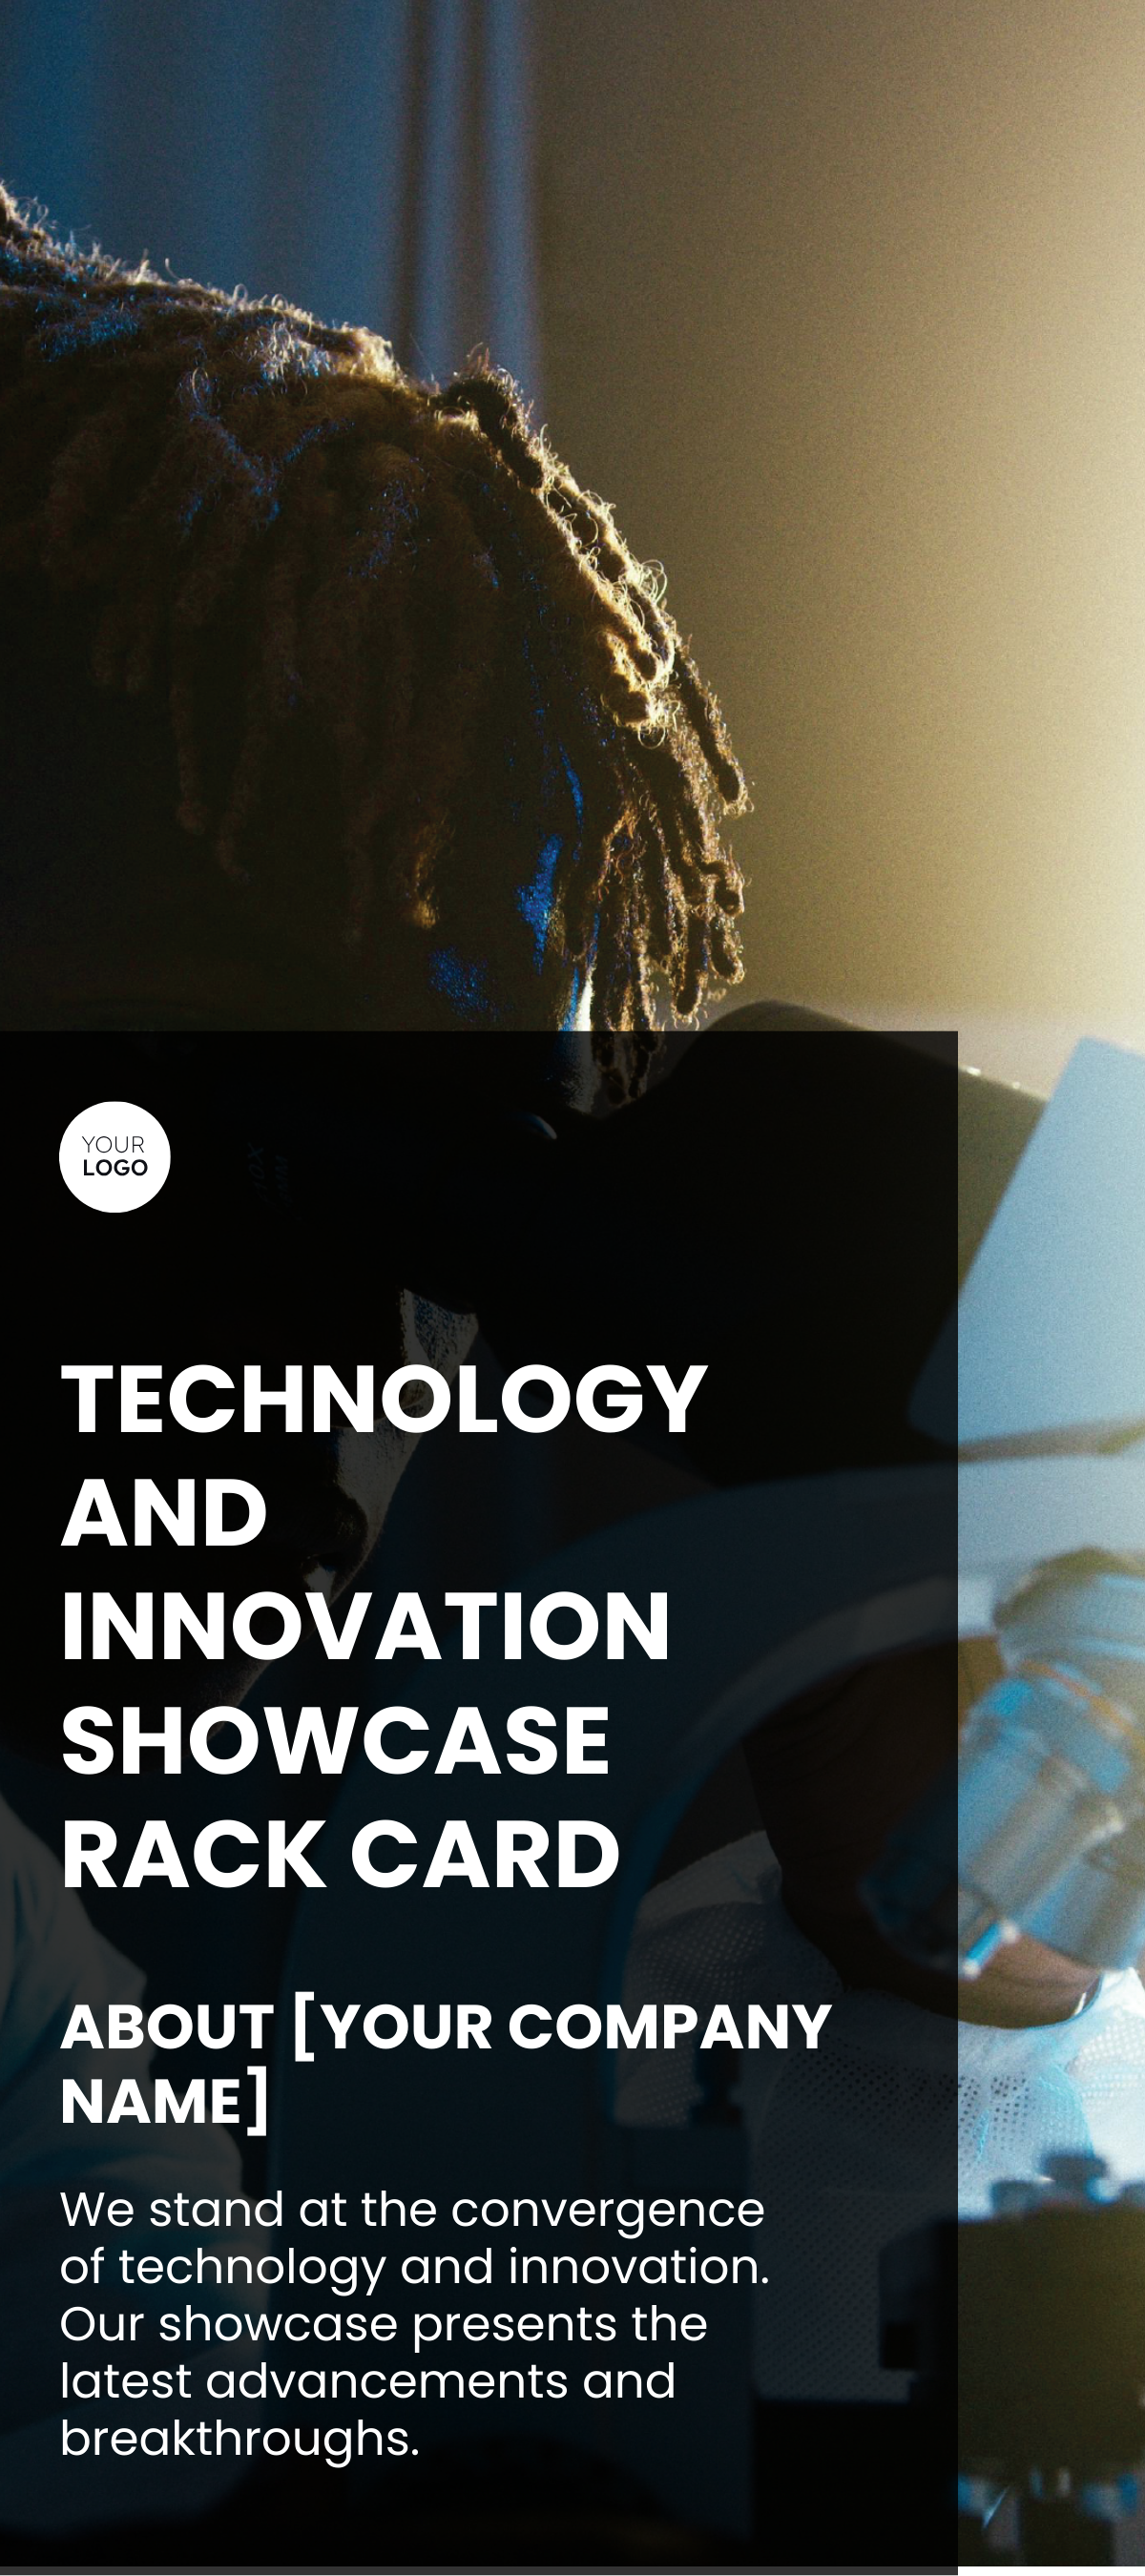 Technology and Innovation Showcase Rack Card Template